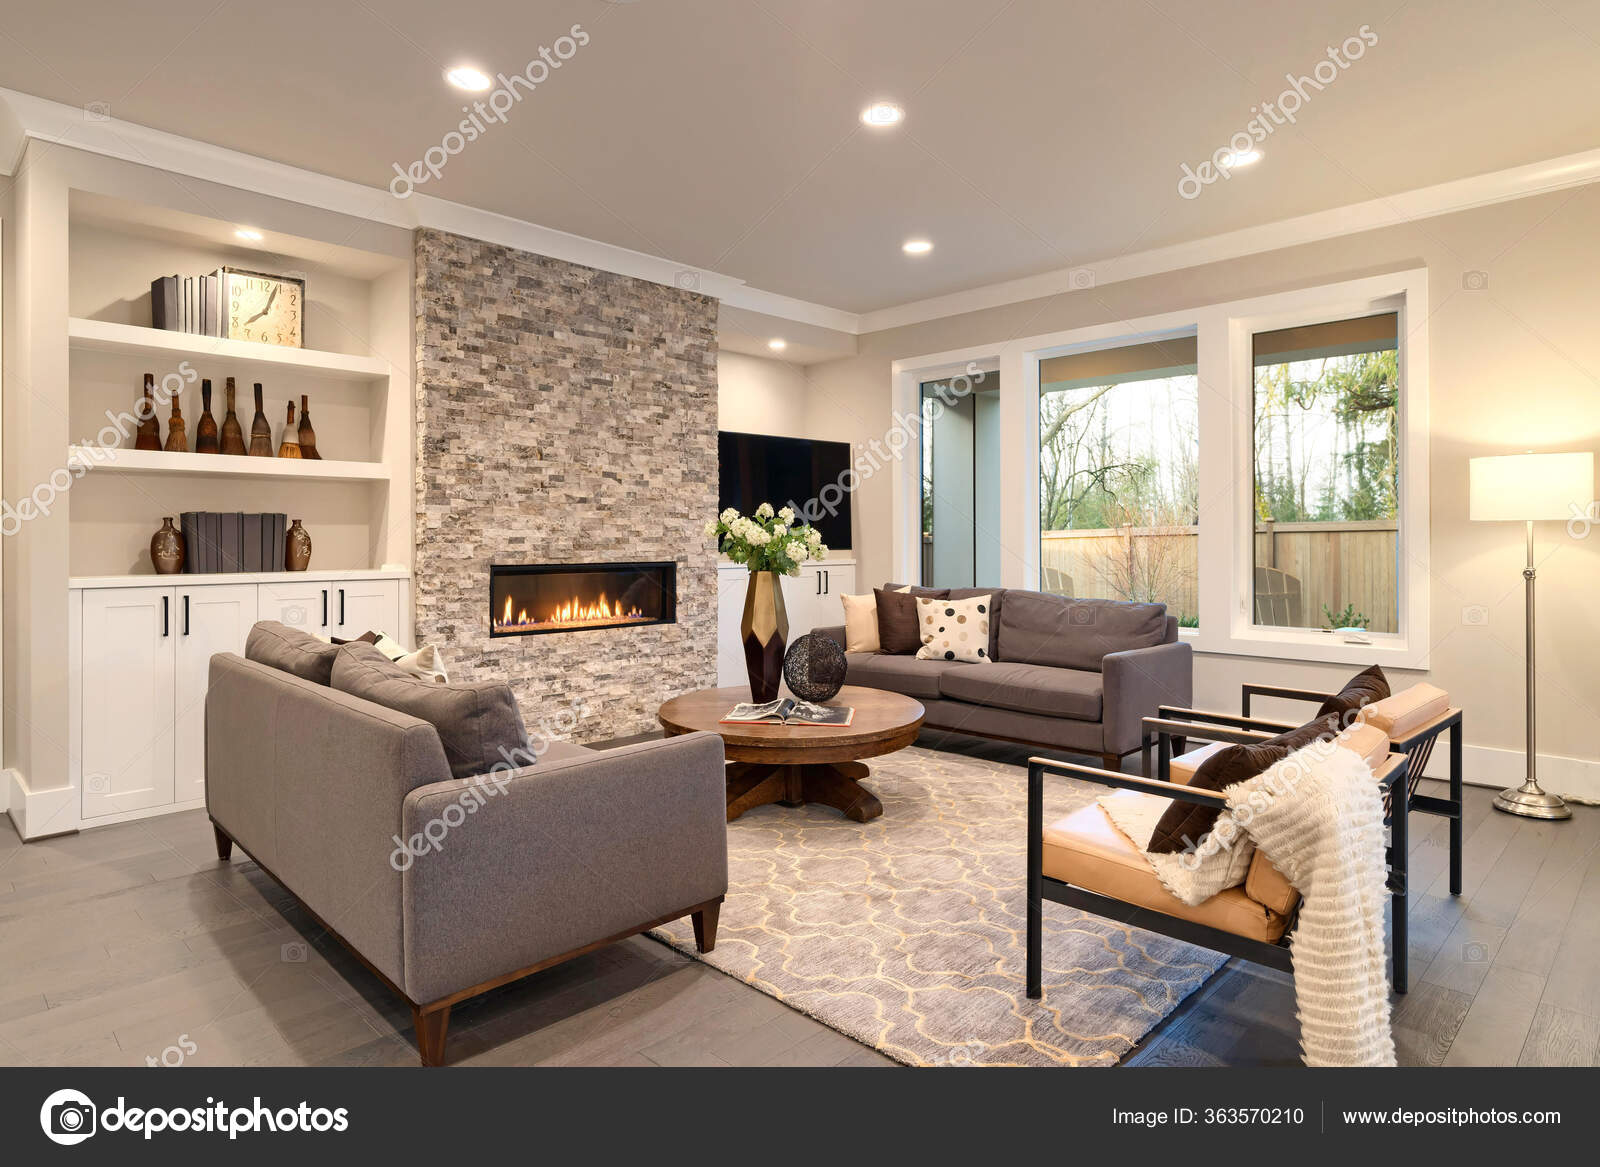 Modern Rustic Natural Stock Photo, Luxury Home Living Room Design